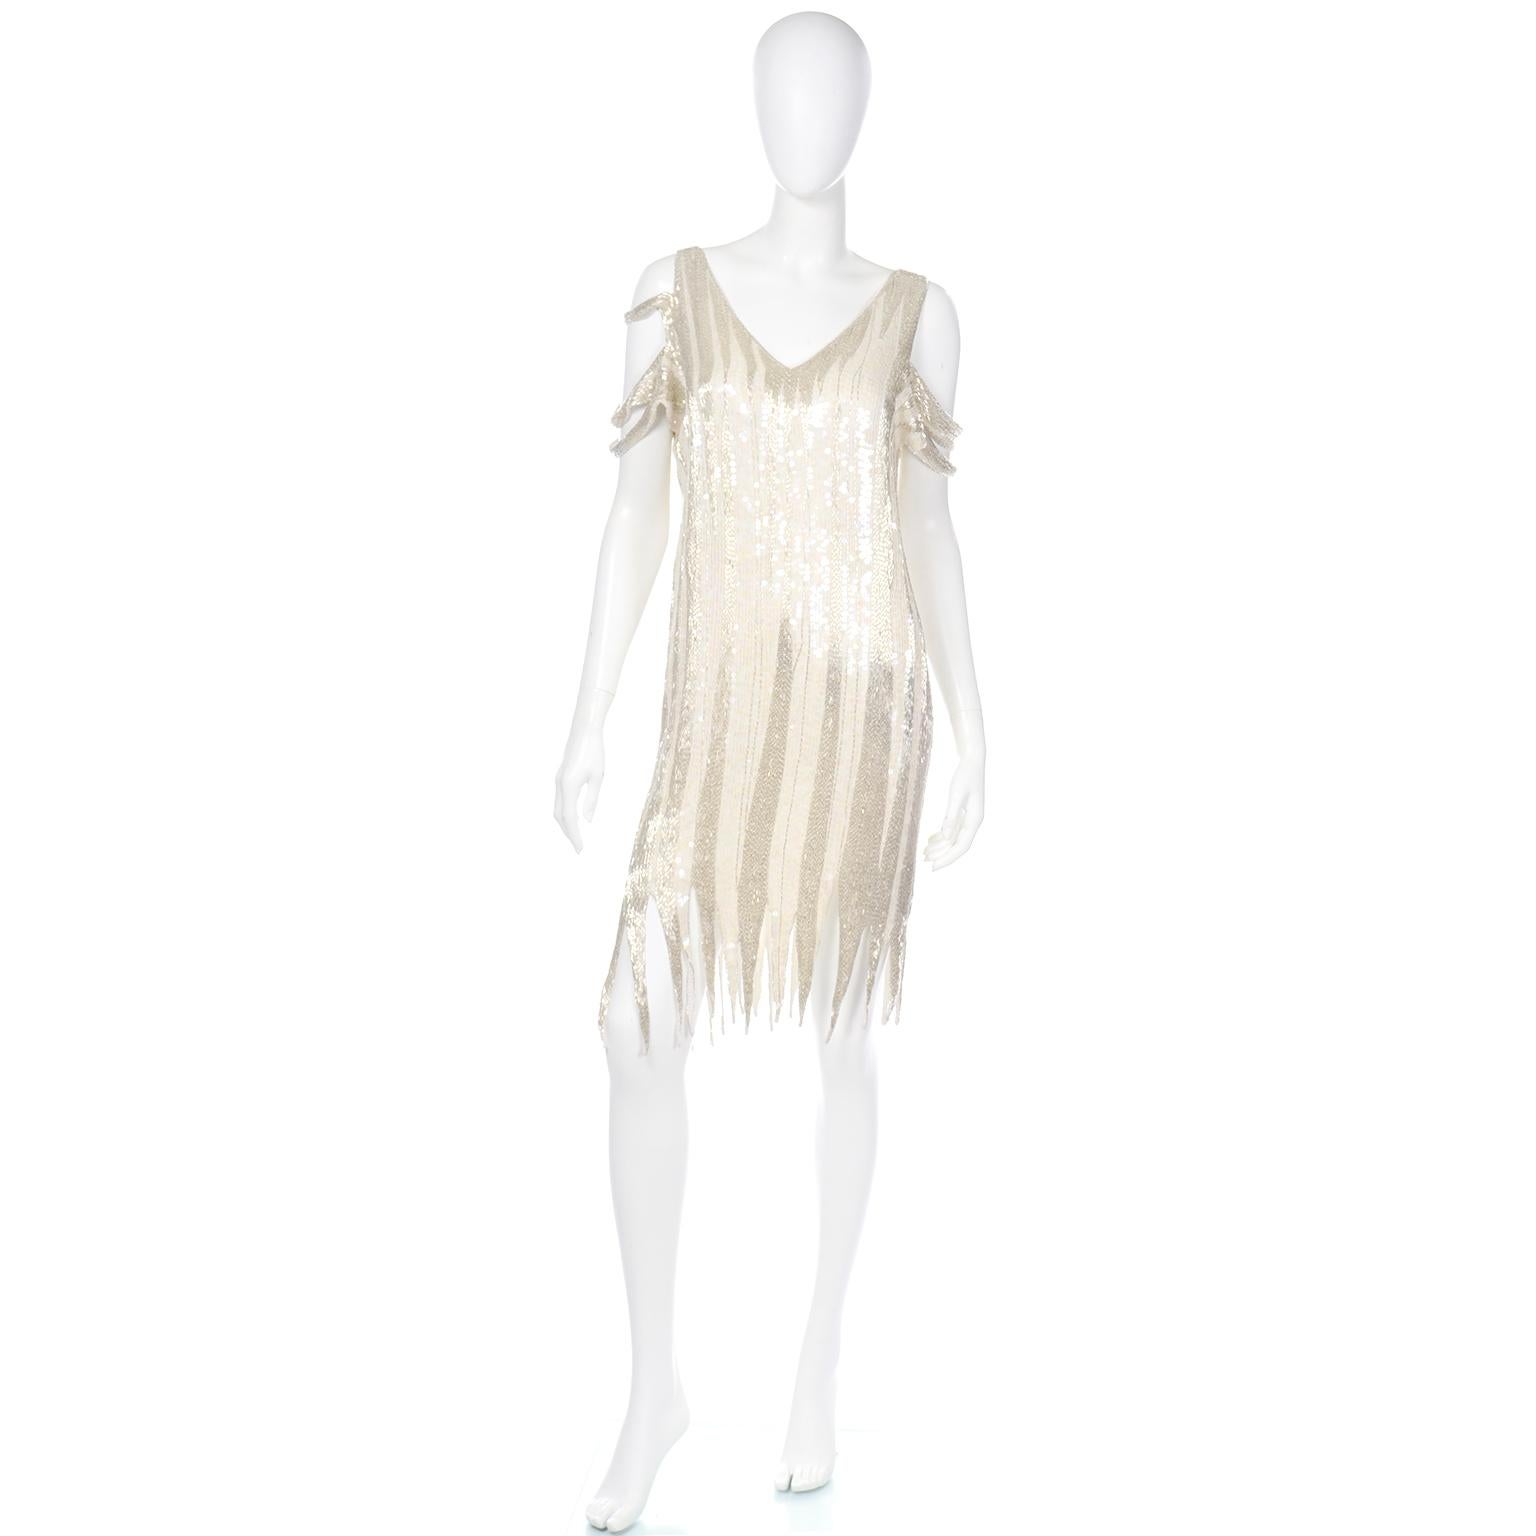 This is an elegant vintage fully beaded ivory silk evening dress that was inspired by 1920's flappers. We sometimes find that some of the lesser known or unlabeled pieces we come across are the most interesting!  The dress is covered with lovely